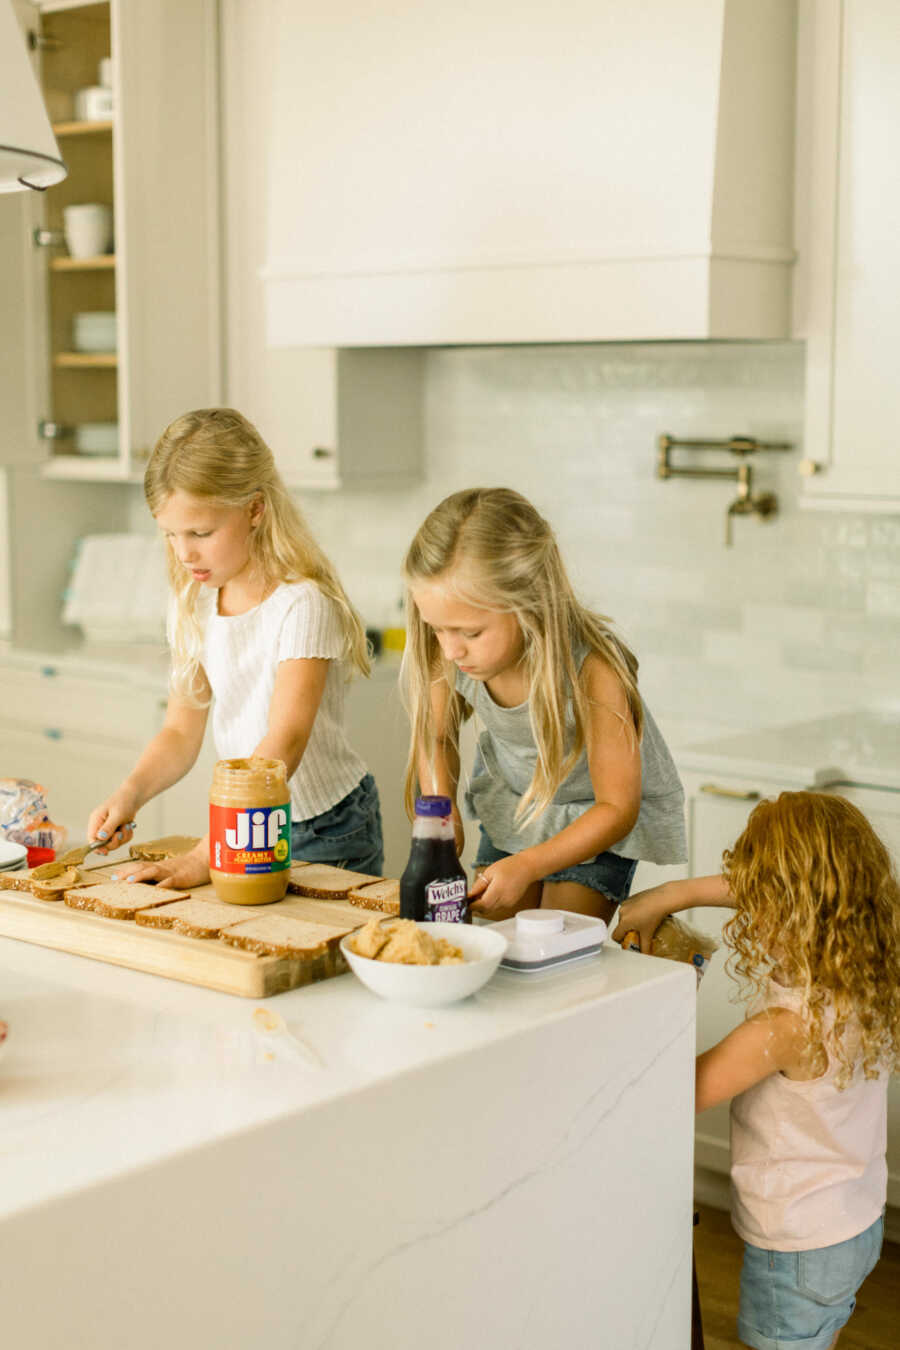 Little girls help their mom with lunch by assembling sandwiches